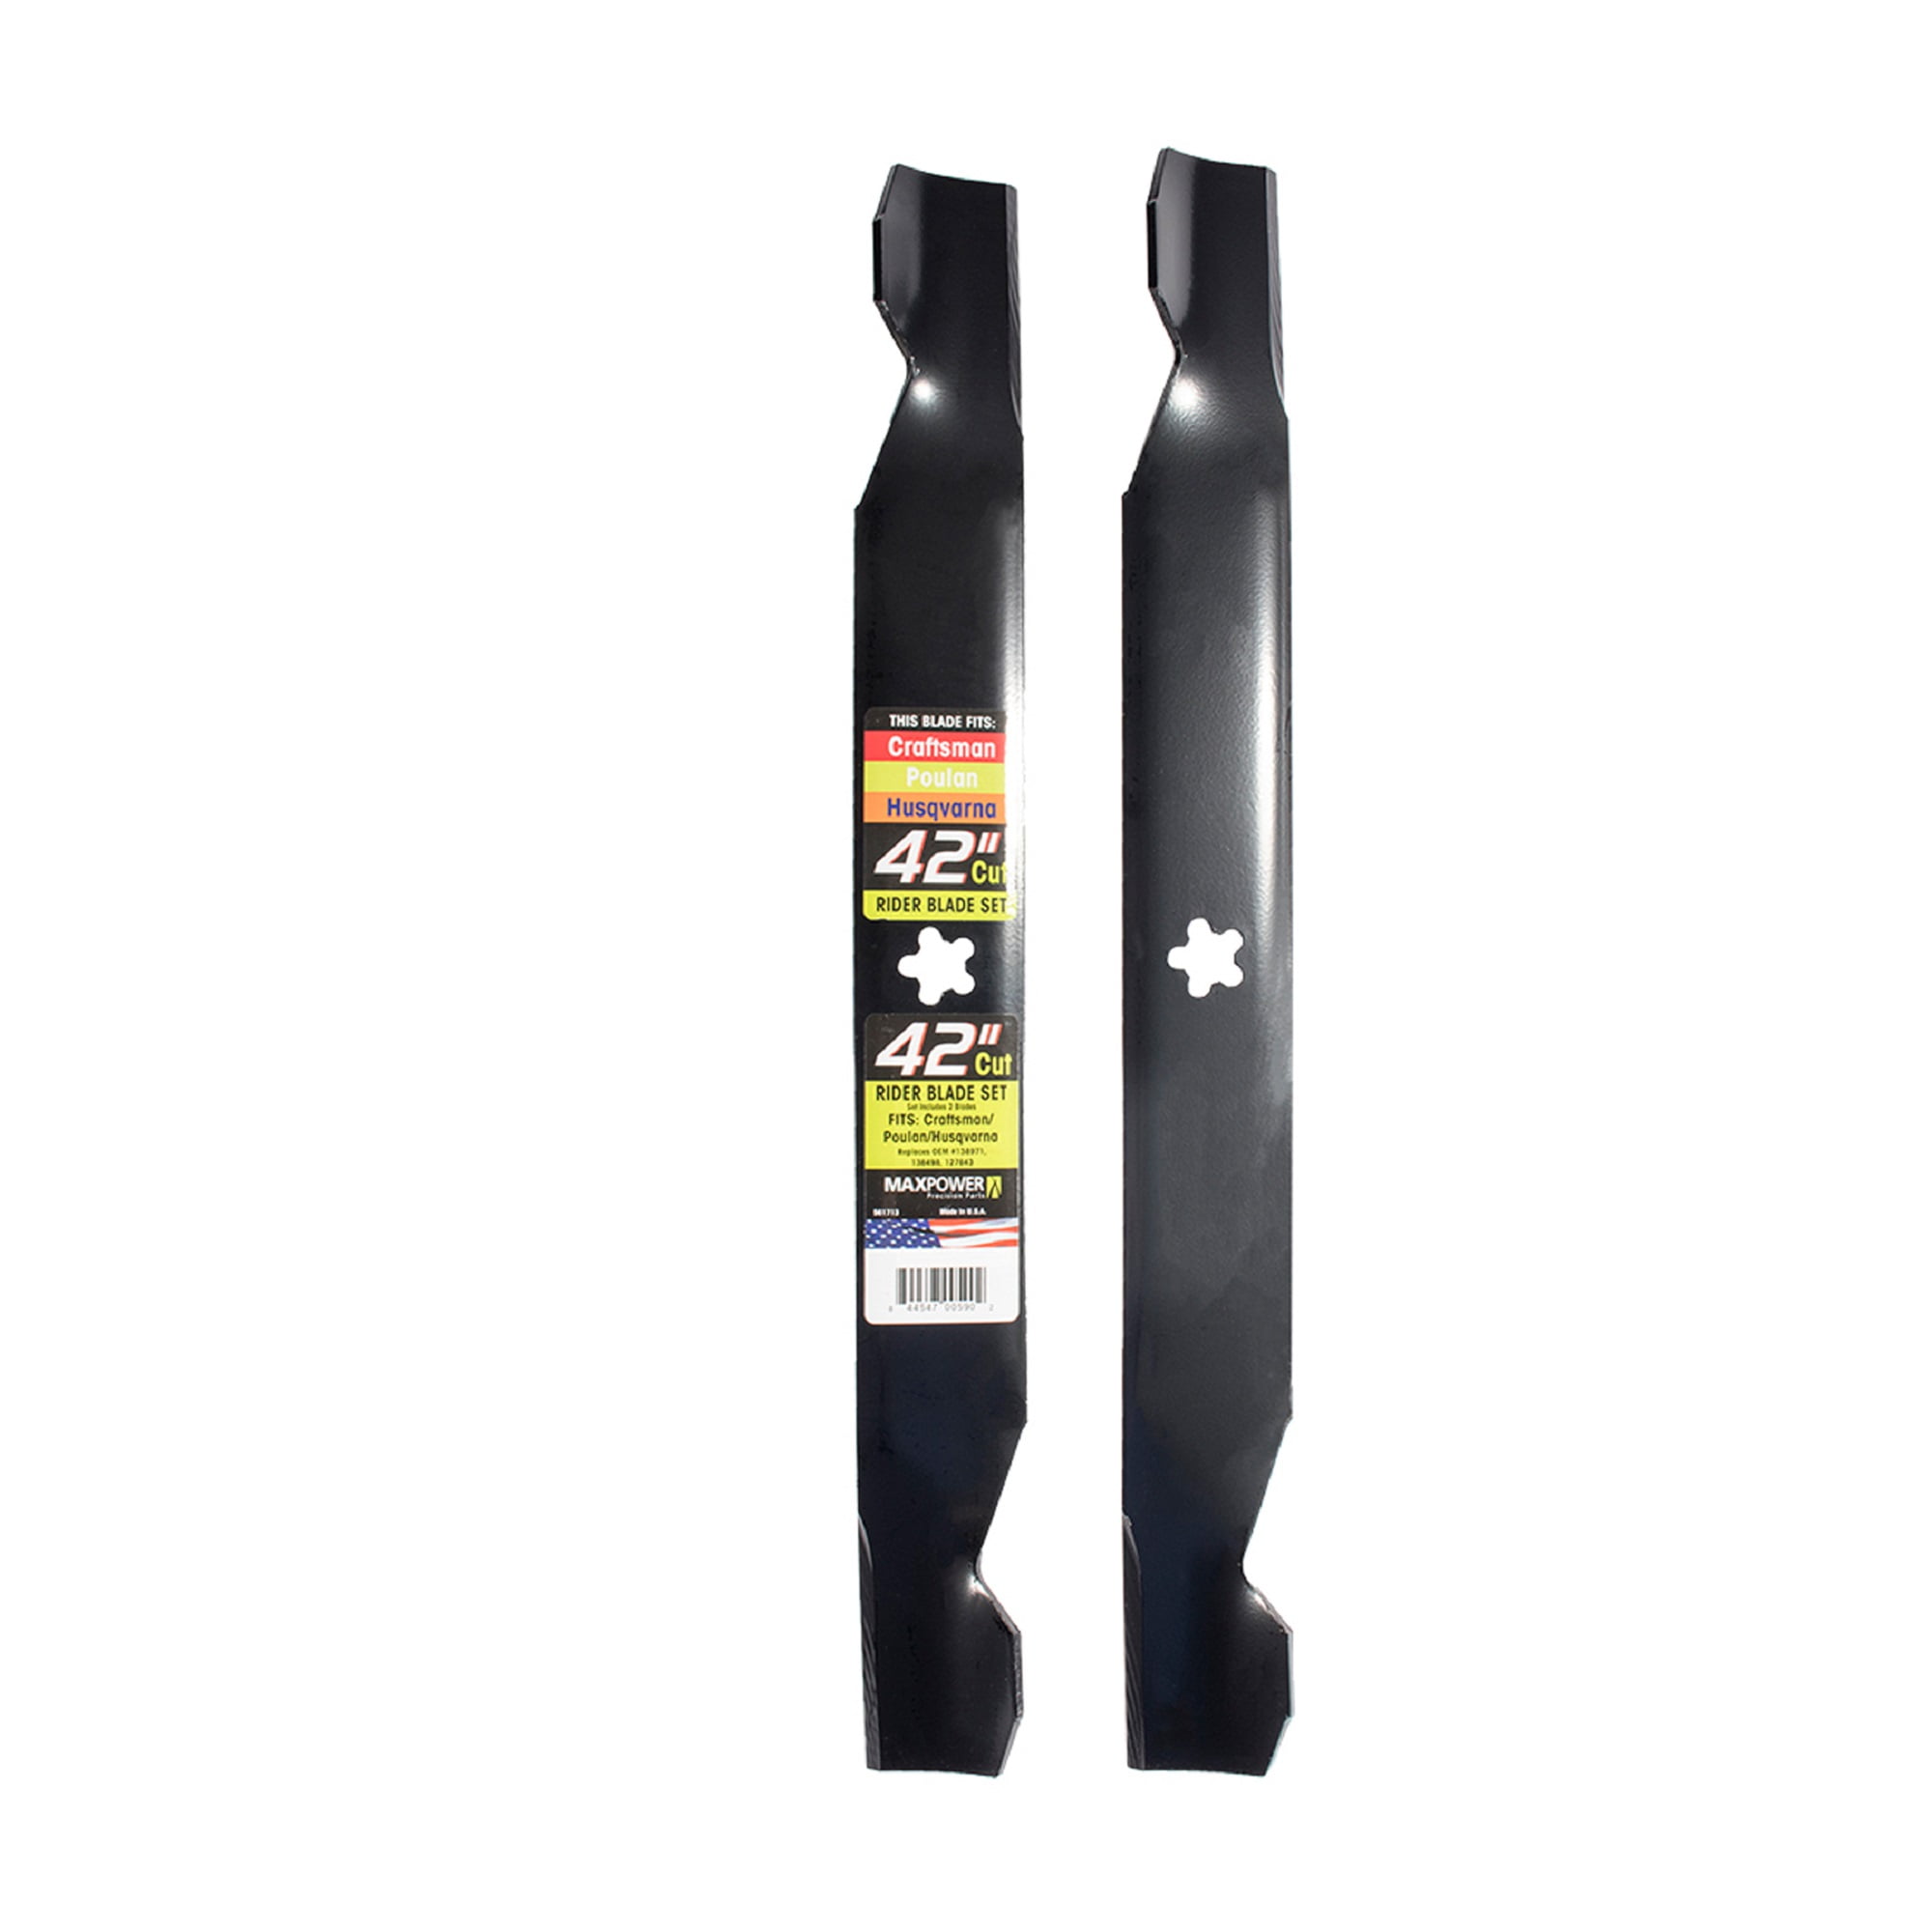 Replaces 138971 and 138498 Maxpower 561713 2-Blade Set for 42-Inch Cut Poulan Husqvarna